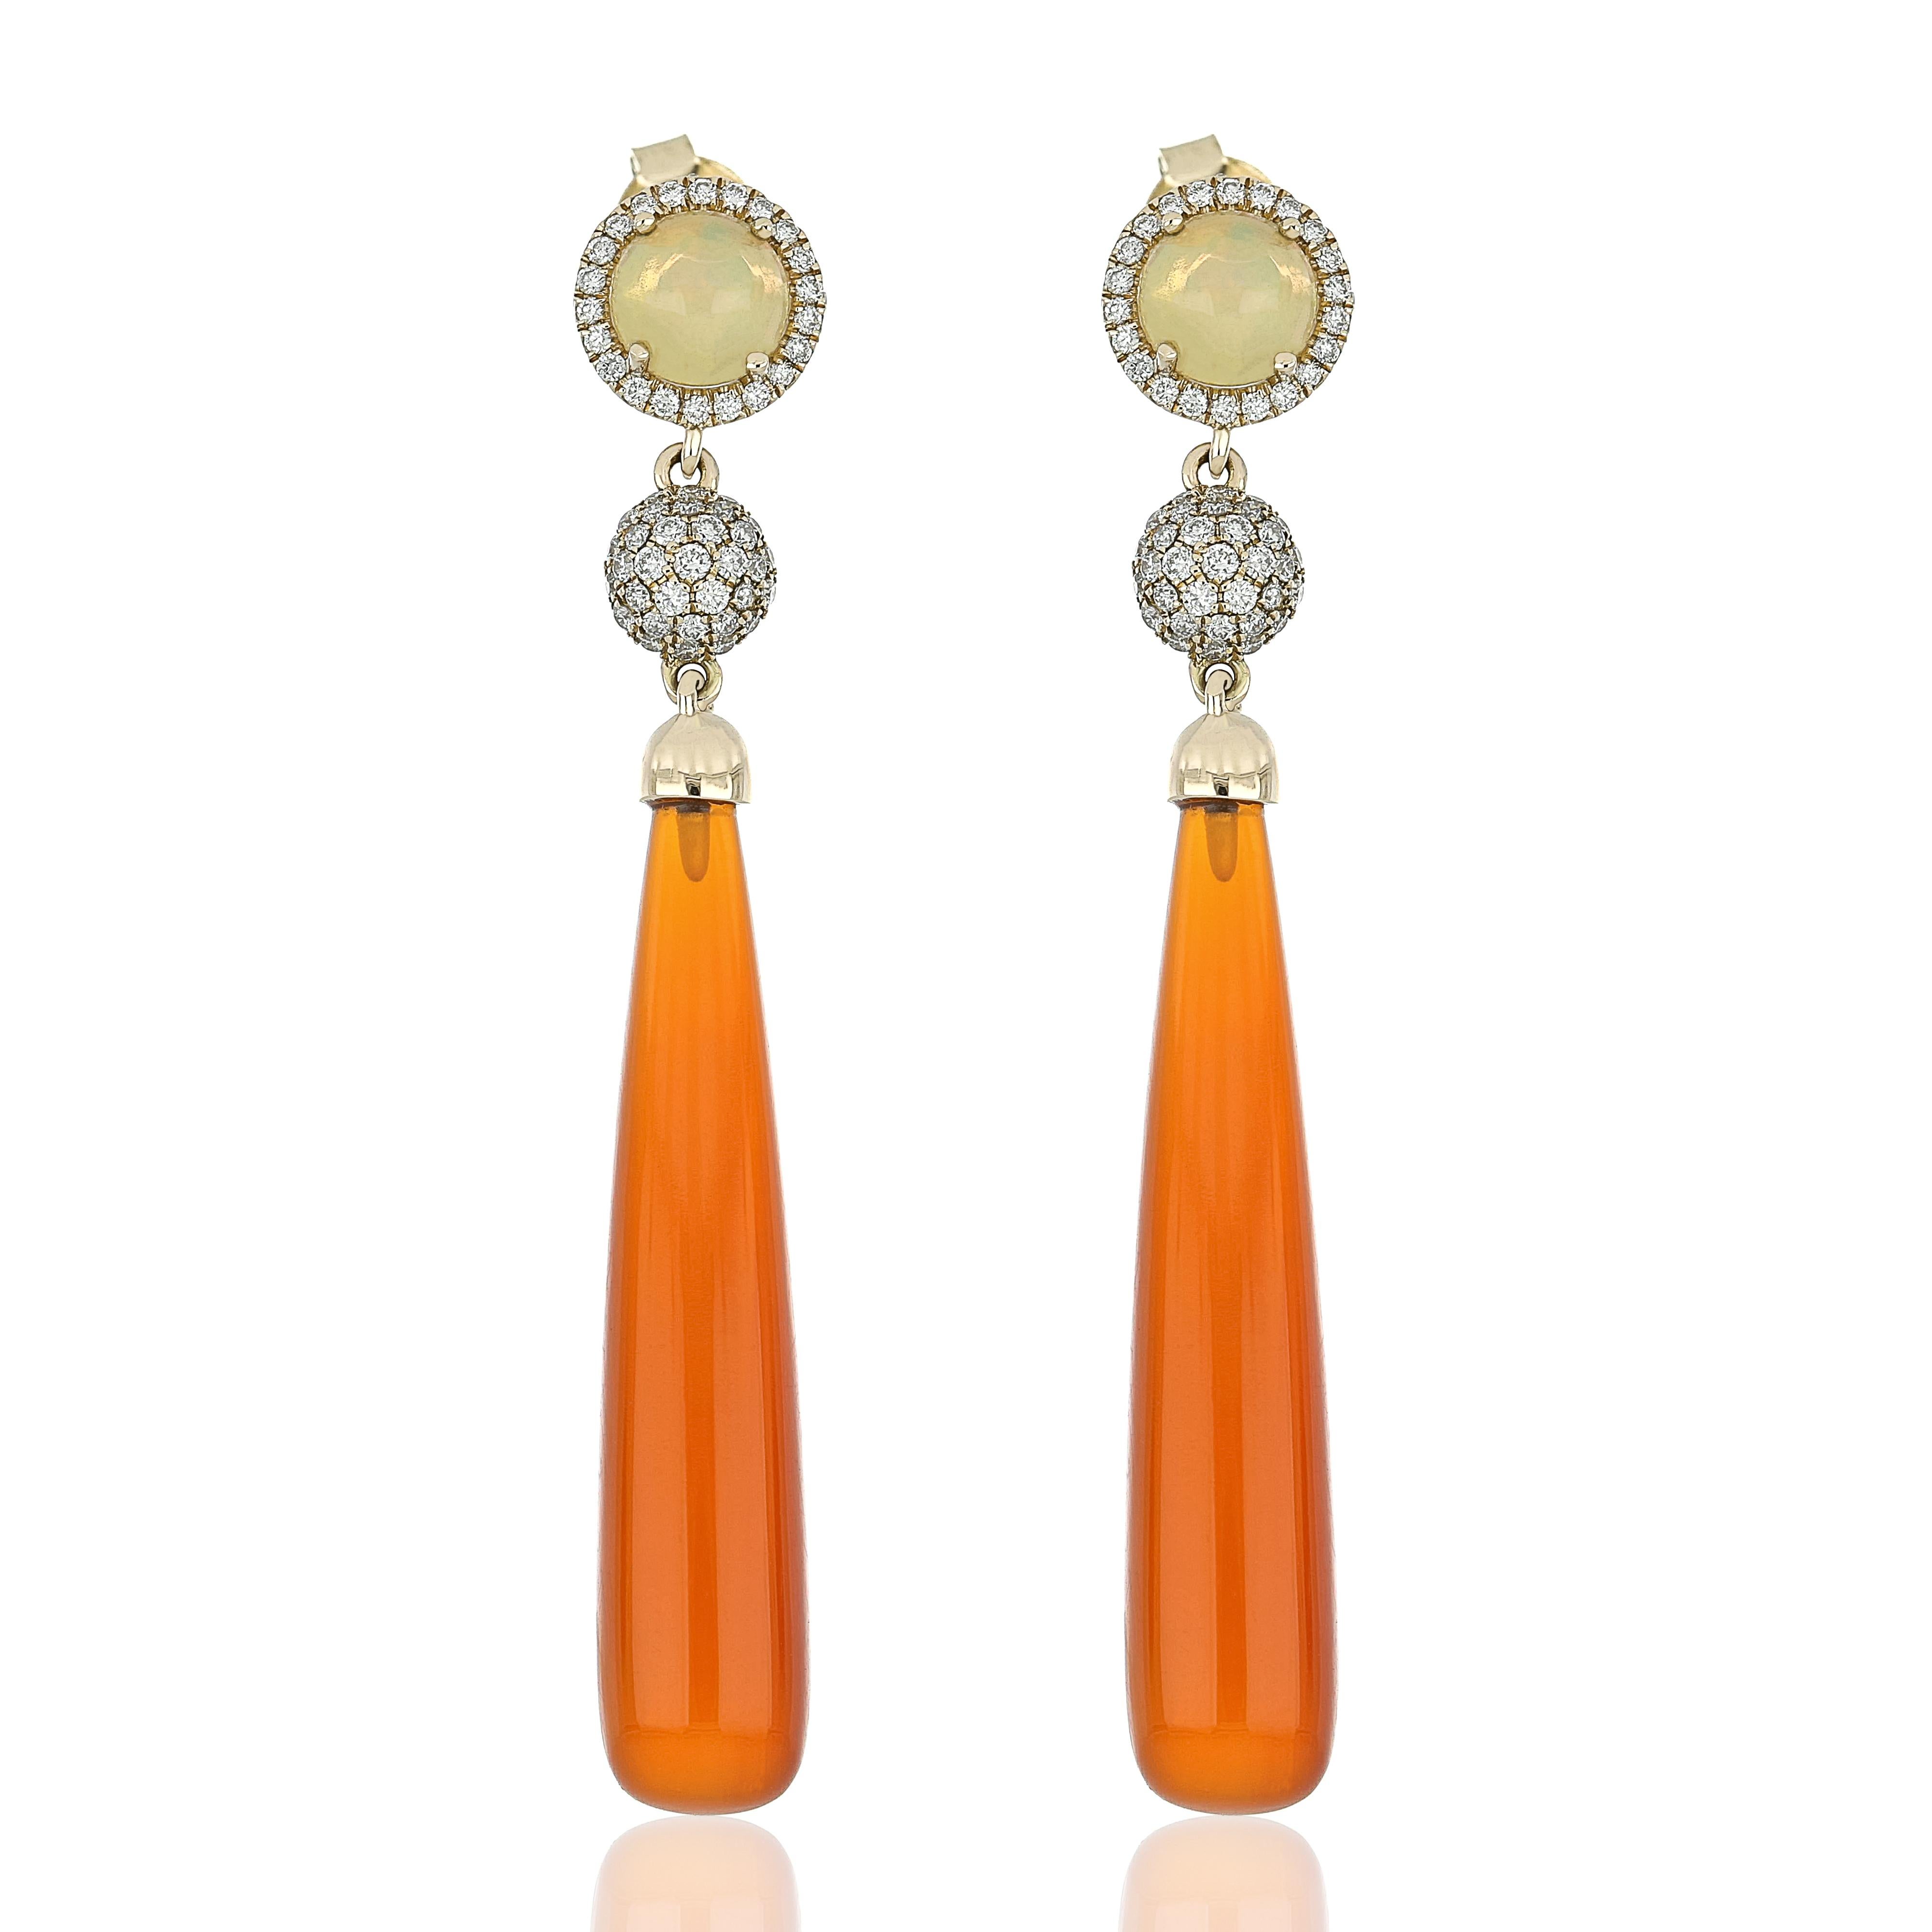 Elegant and exquisitely detailed 14 Karat Yellow Gold Earring, set with 21.58Cts Pear Drop Shape Carnelian, and 0.11 Cts Round Ethiopian Opaland micro pave set Diamonds, weighing approx. 0.465Cts Beautifully Hand crafted in 14 Karat Yellow